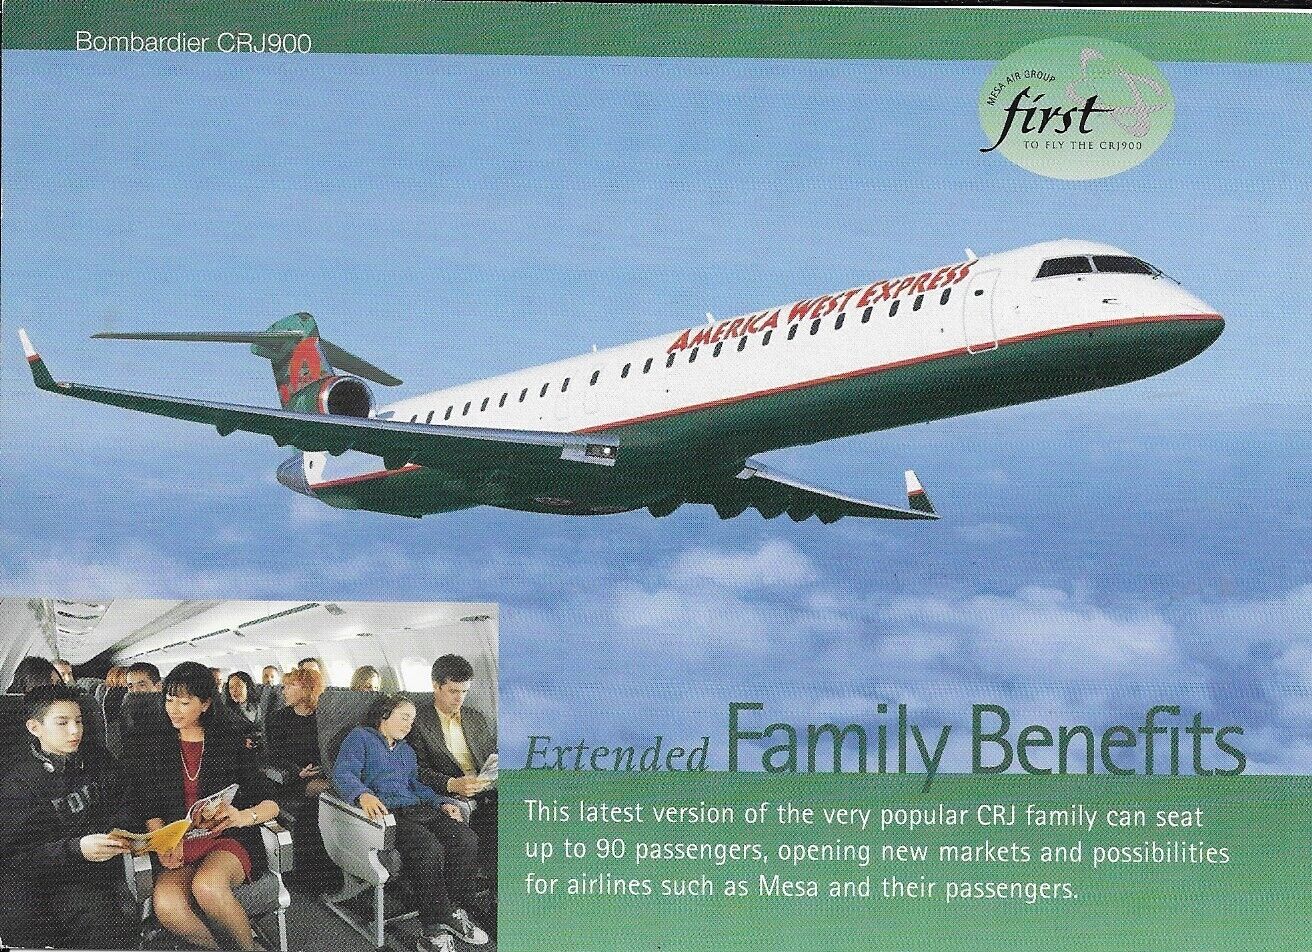 LARGE America West Airlines CRJ900 Data Postcard-Bombardier issued, 6inx4in